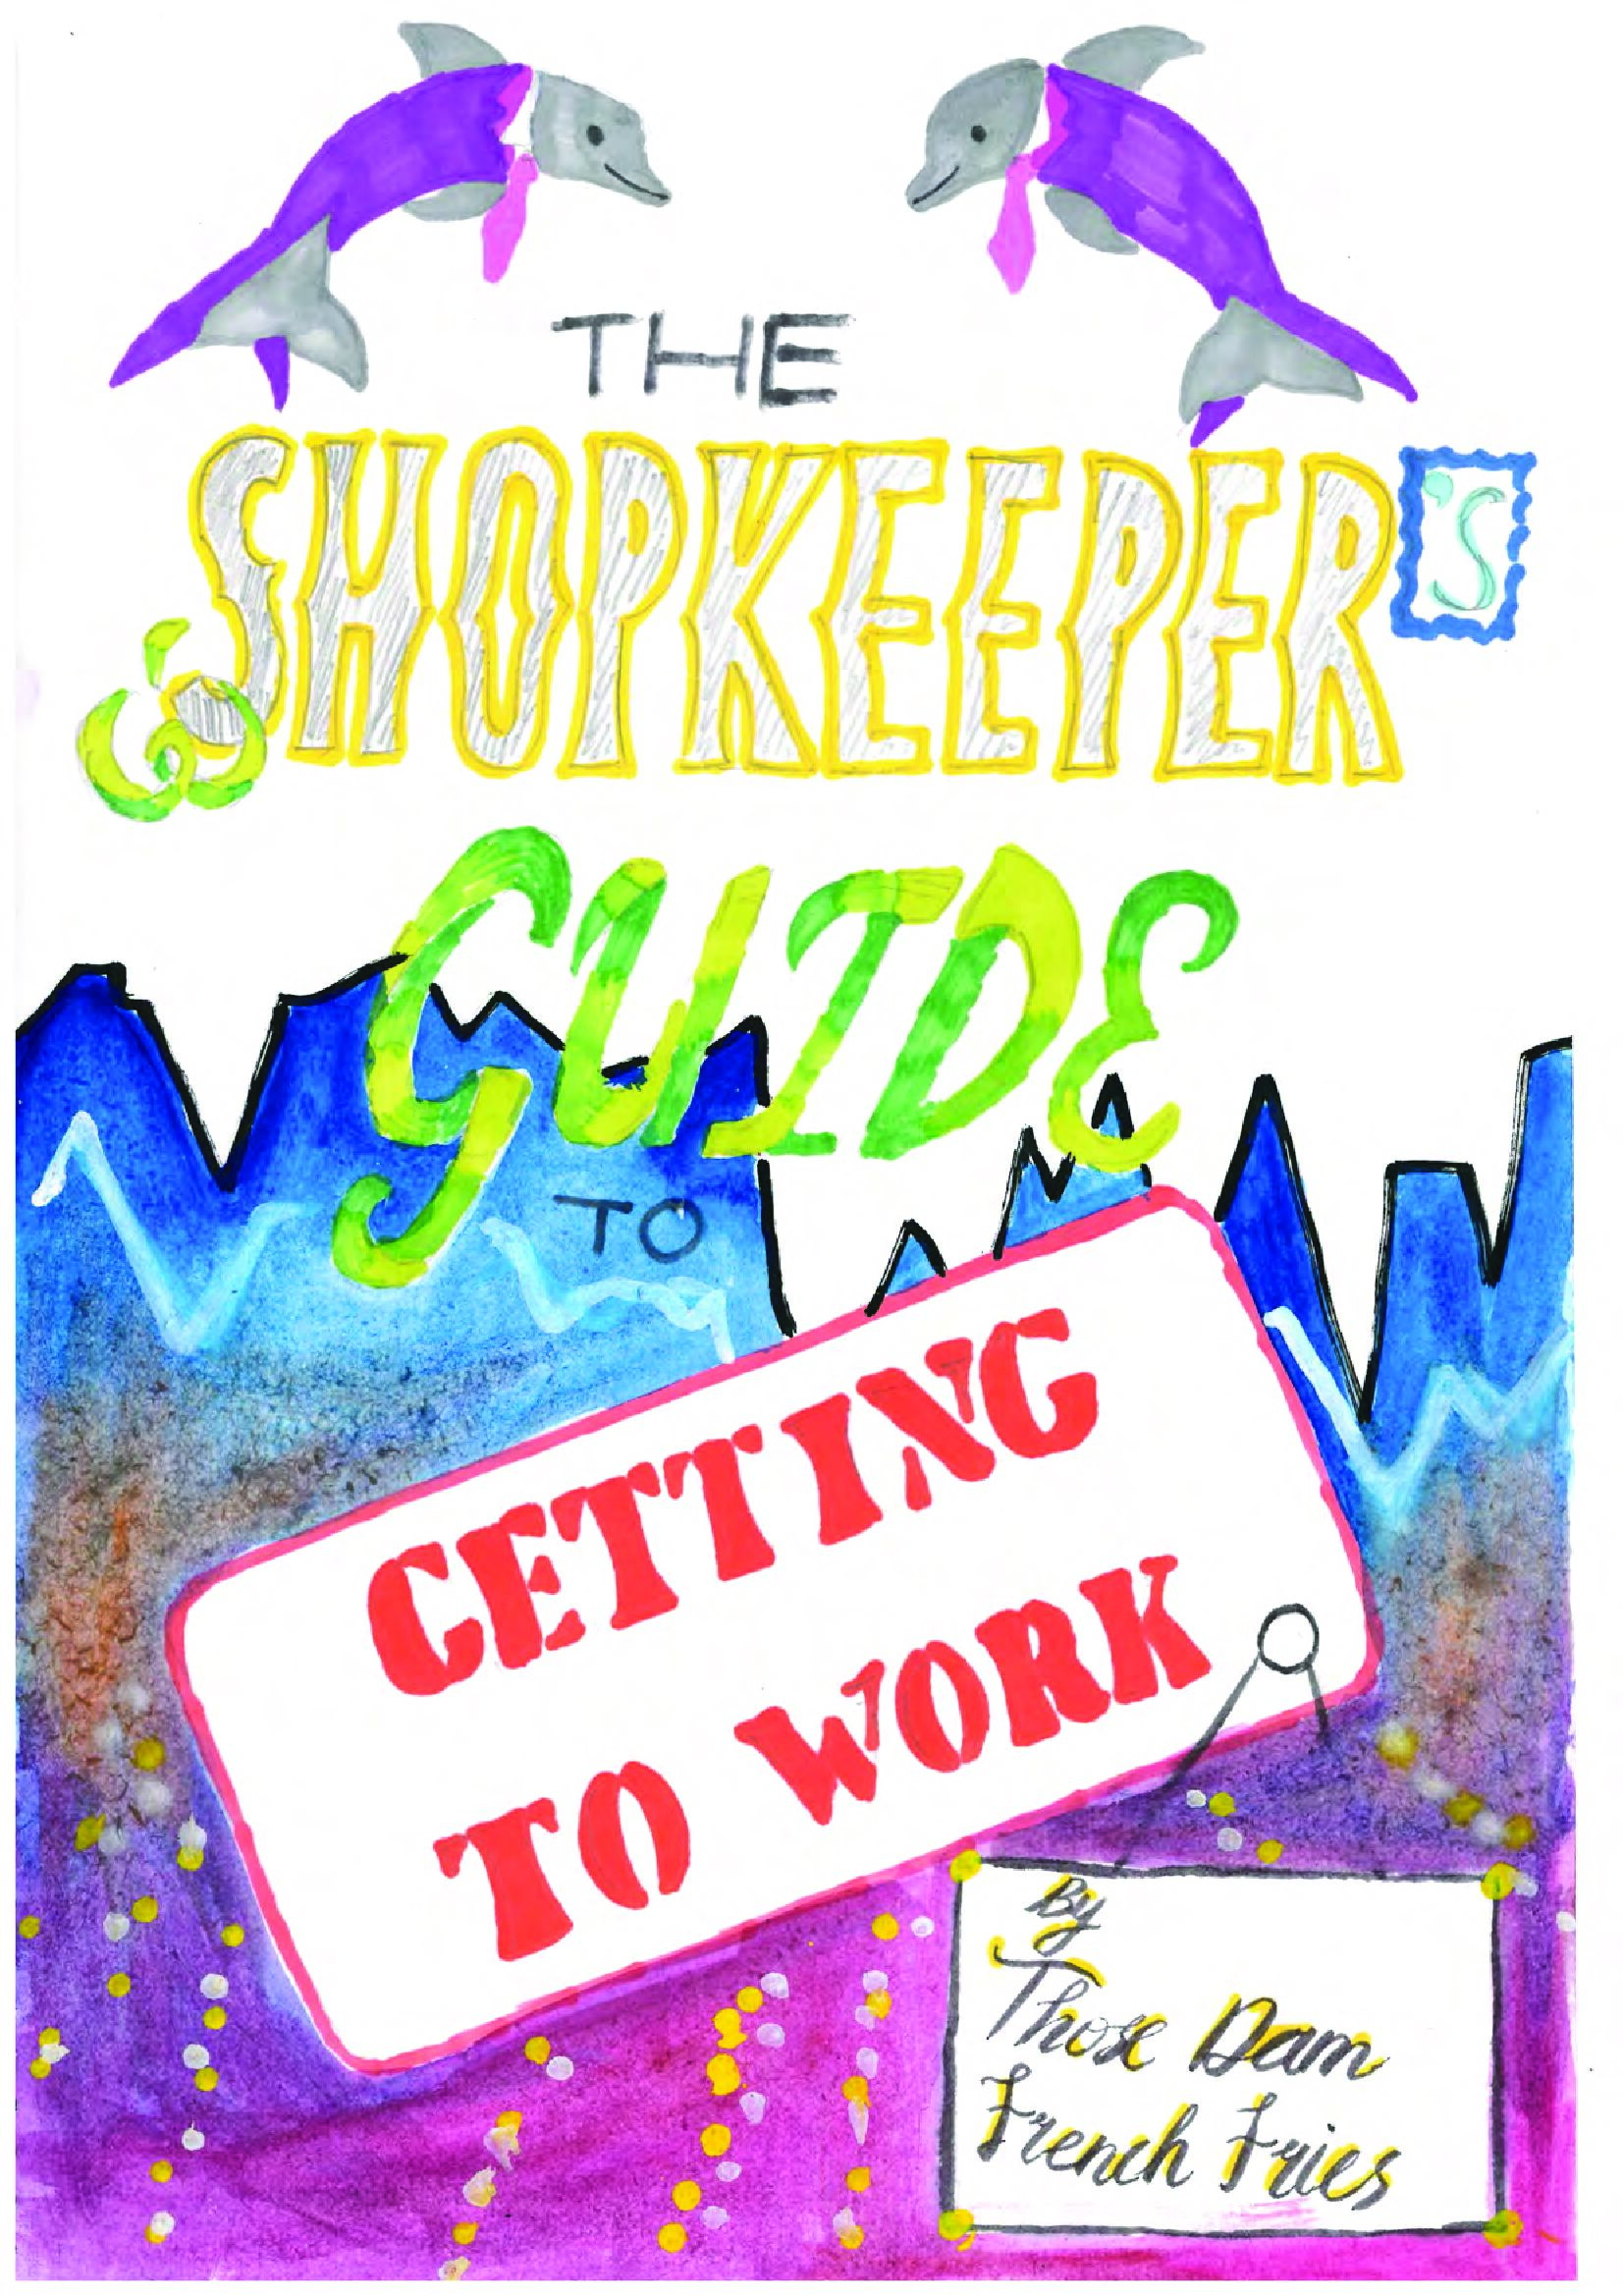 The Shopkeeper's Guide to Getting to Work